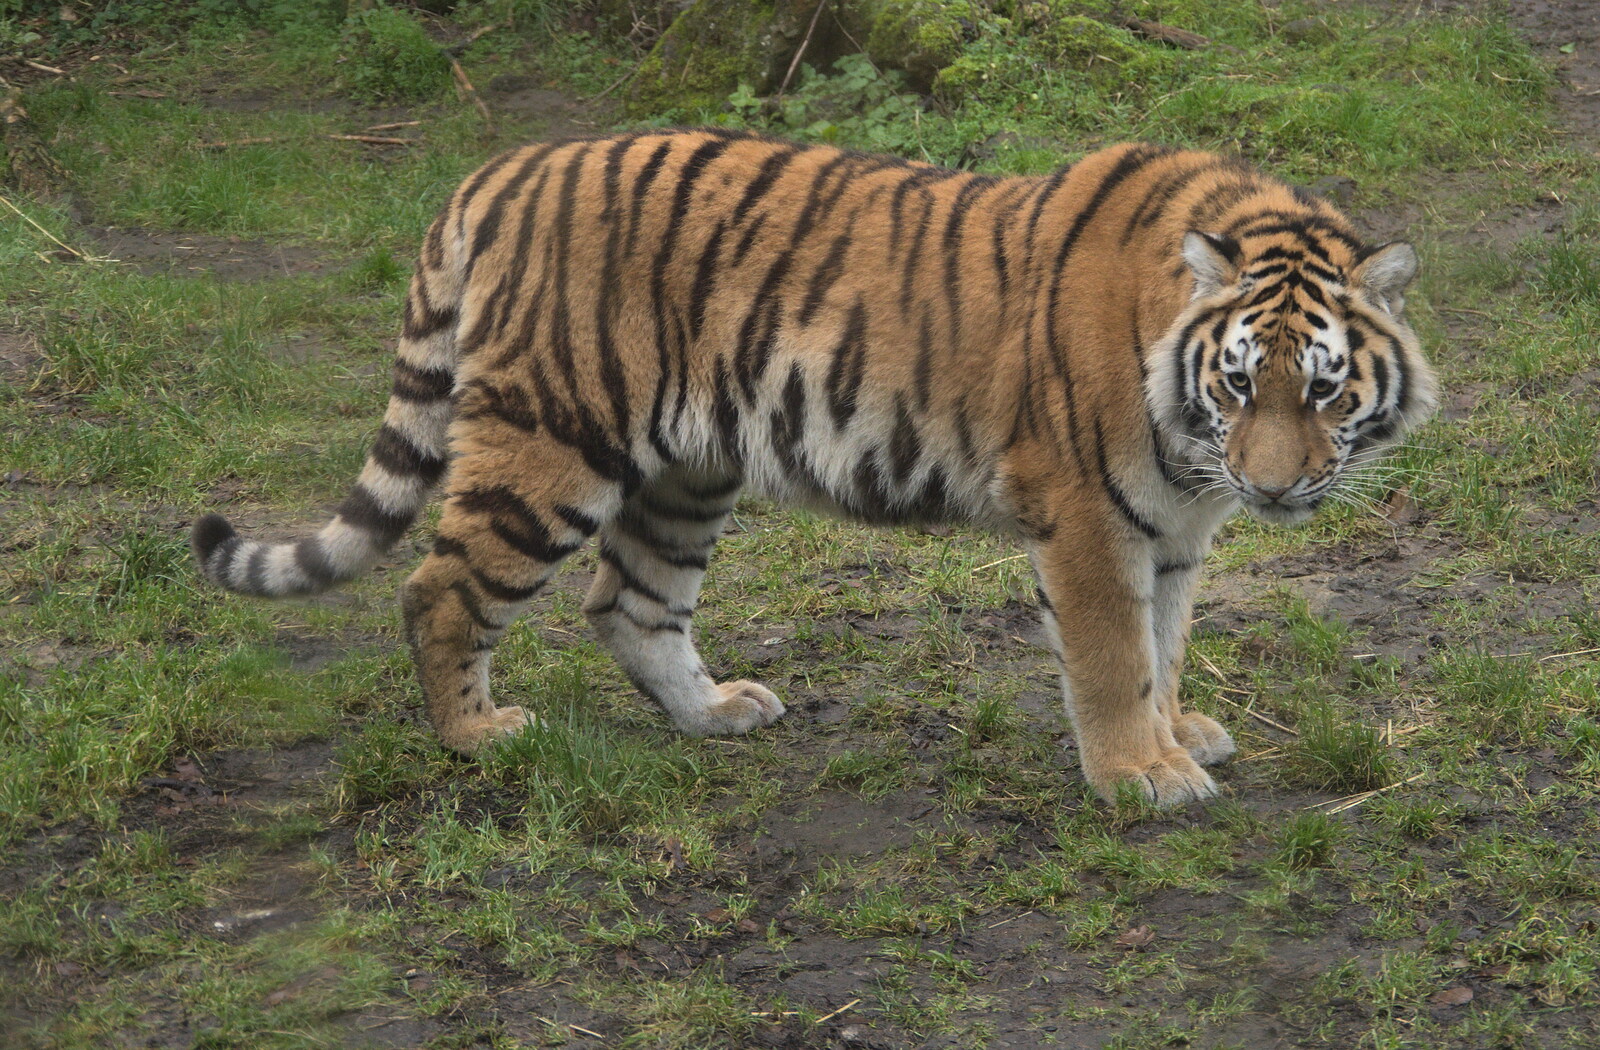 A Few Hours at the Zoo, Banham, Norfolk - 8th January 2023: One of the grown-up tiger cubs prowls around